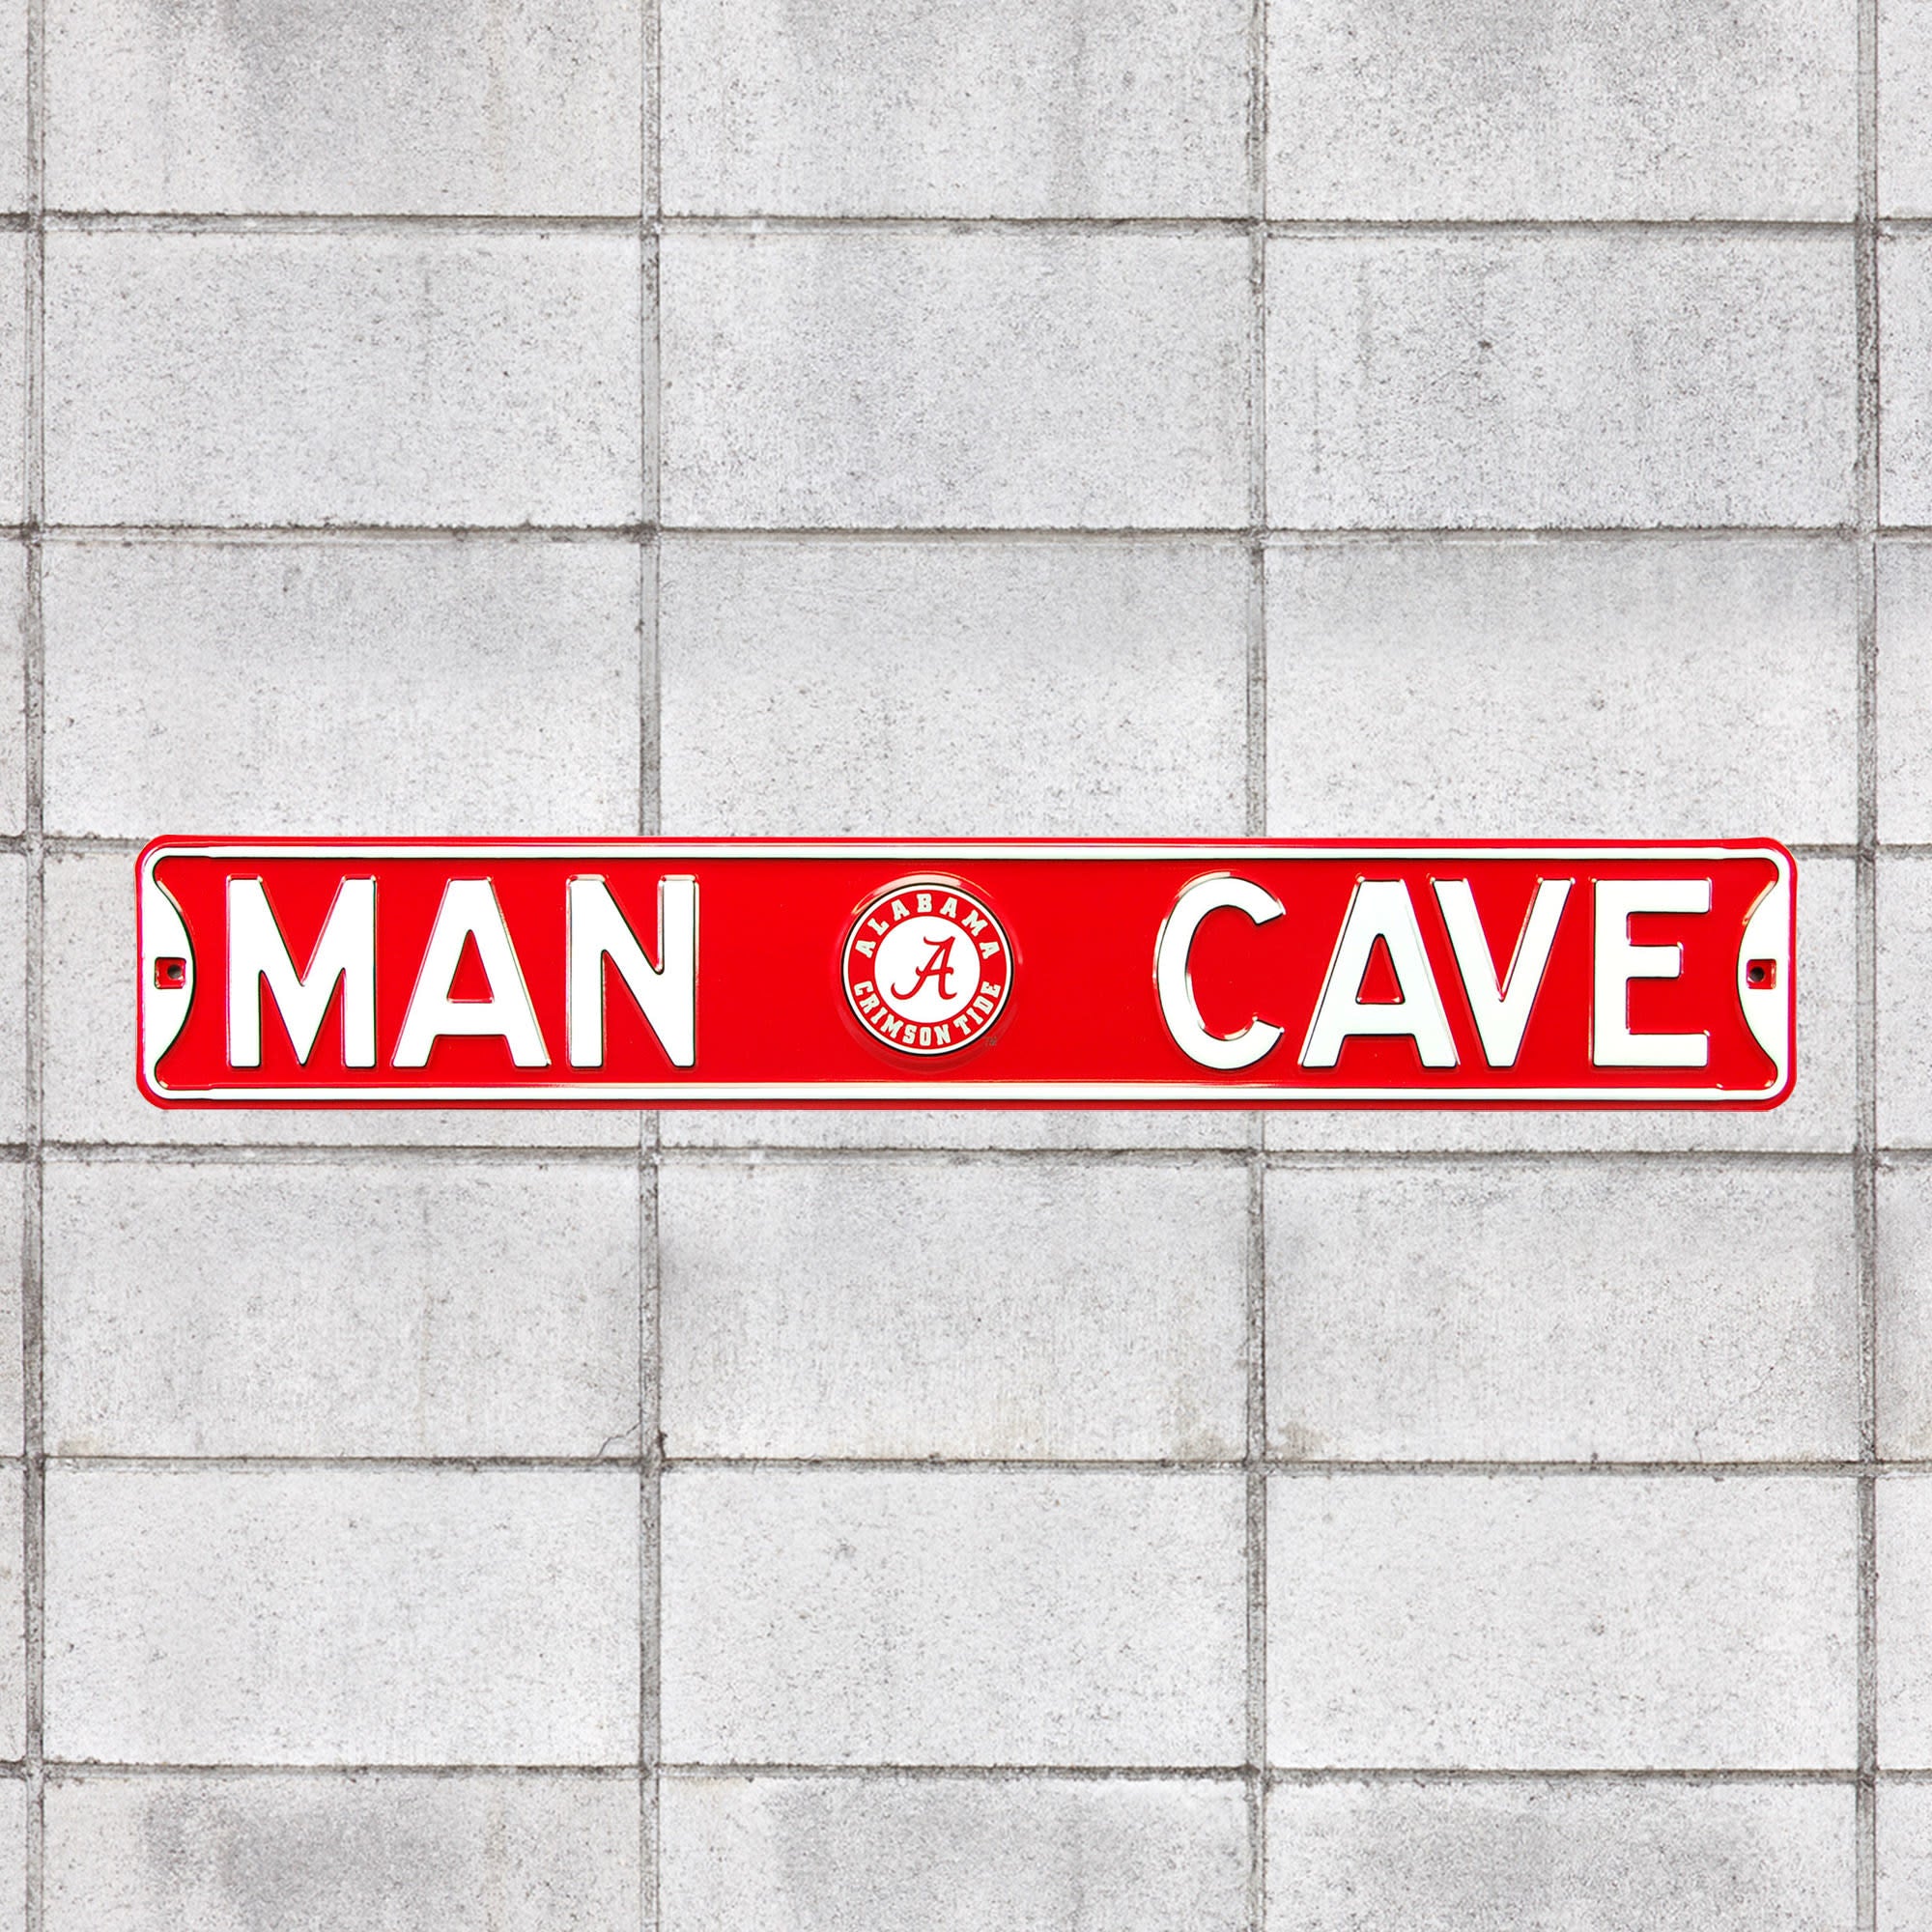 Alabama Crimson Tide: Man Cave - Officially Licensed Metal Street Sign 36.0"W x 6.0"H by Fathead | 100% Steel